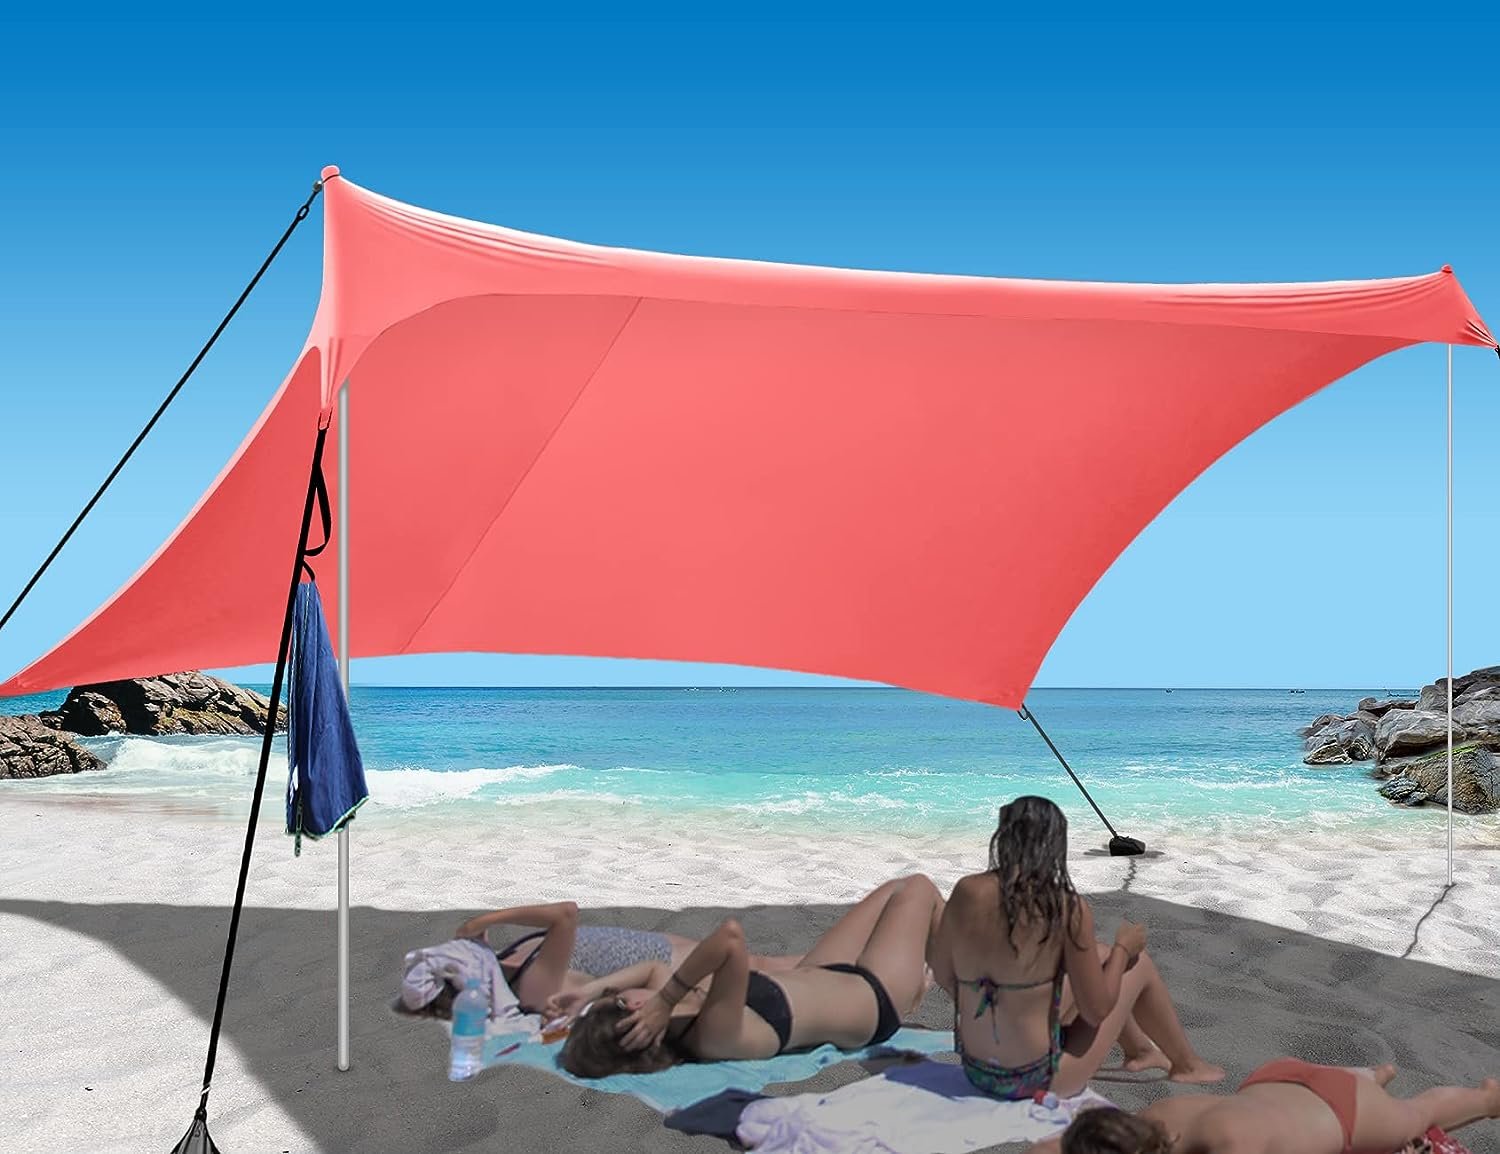 Easierhike Beach Shade Tent Review A Worthwhile Investment